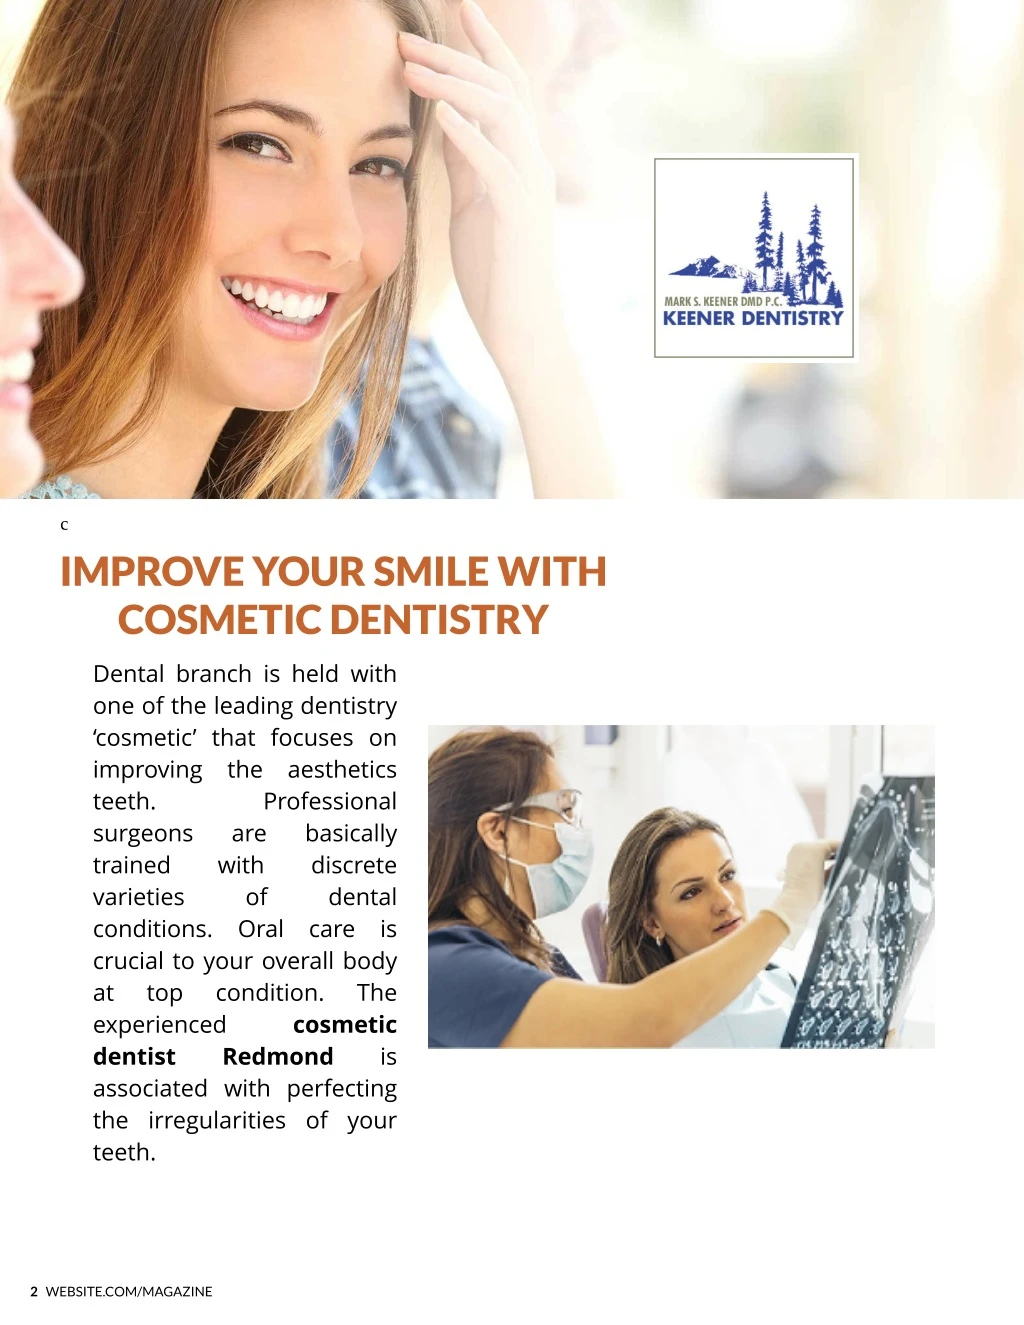 c improve your smile with cosmetic dentistry